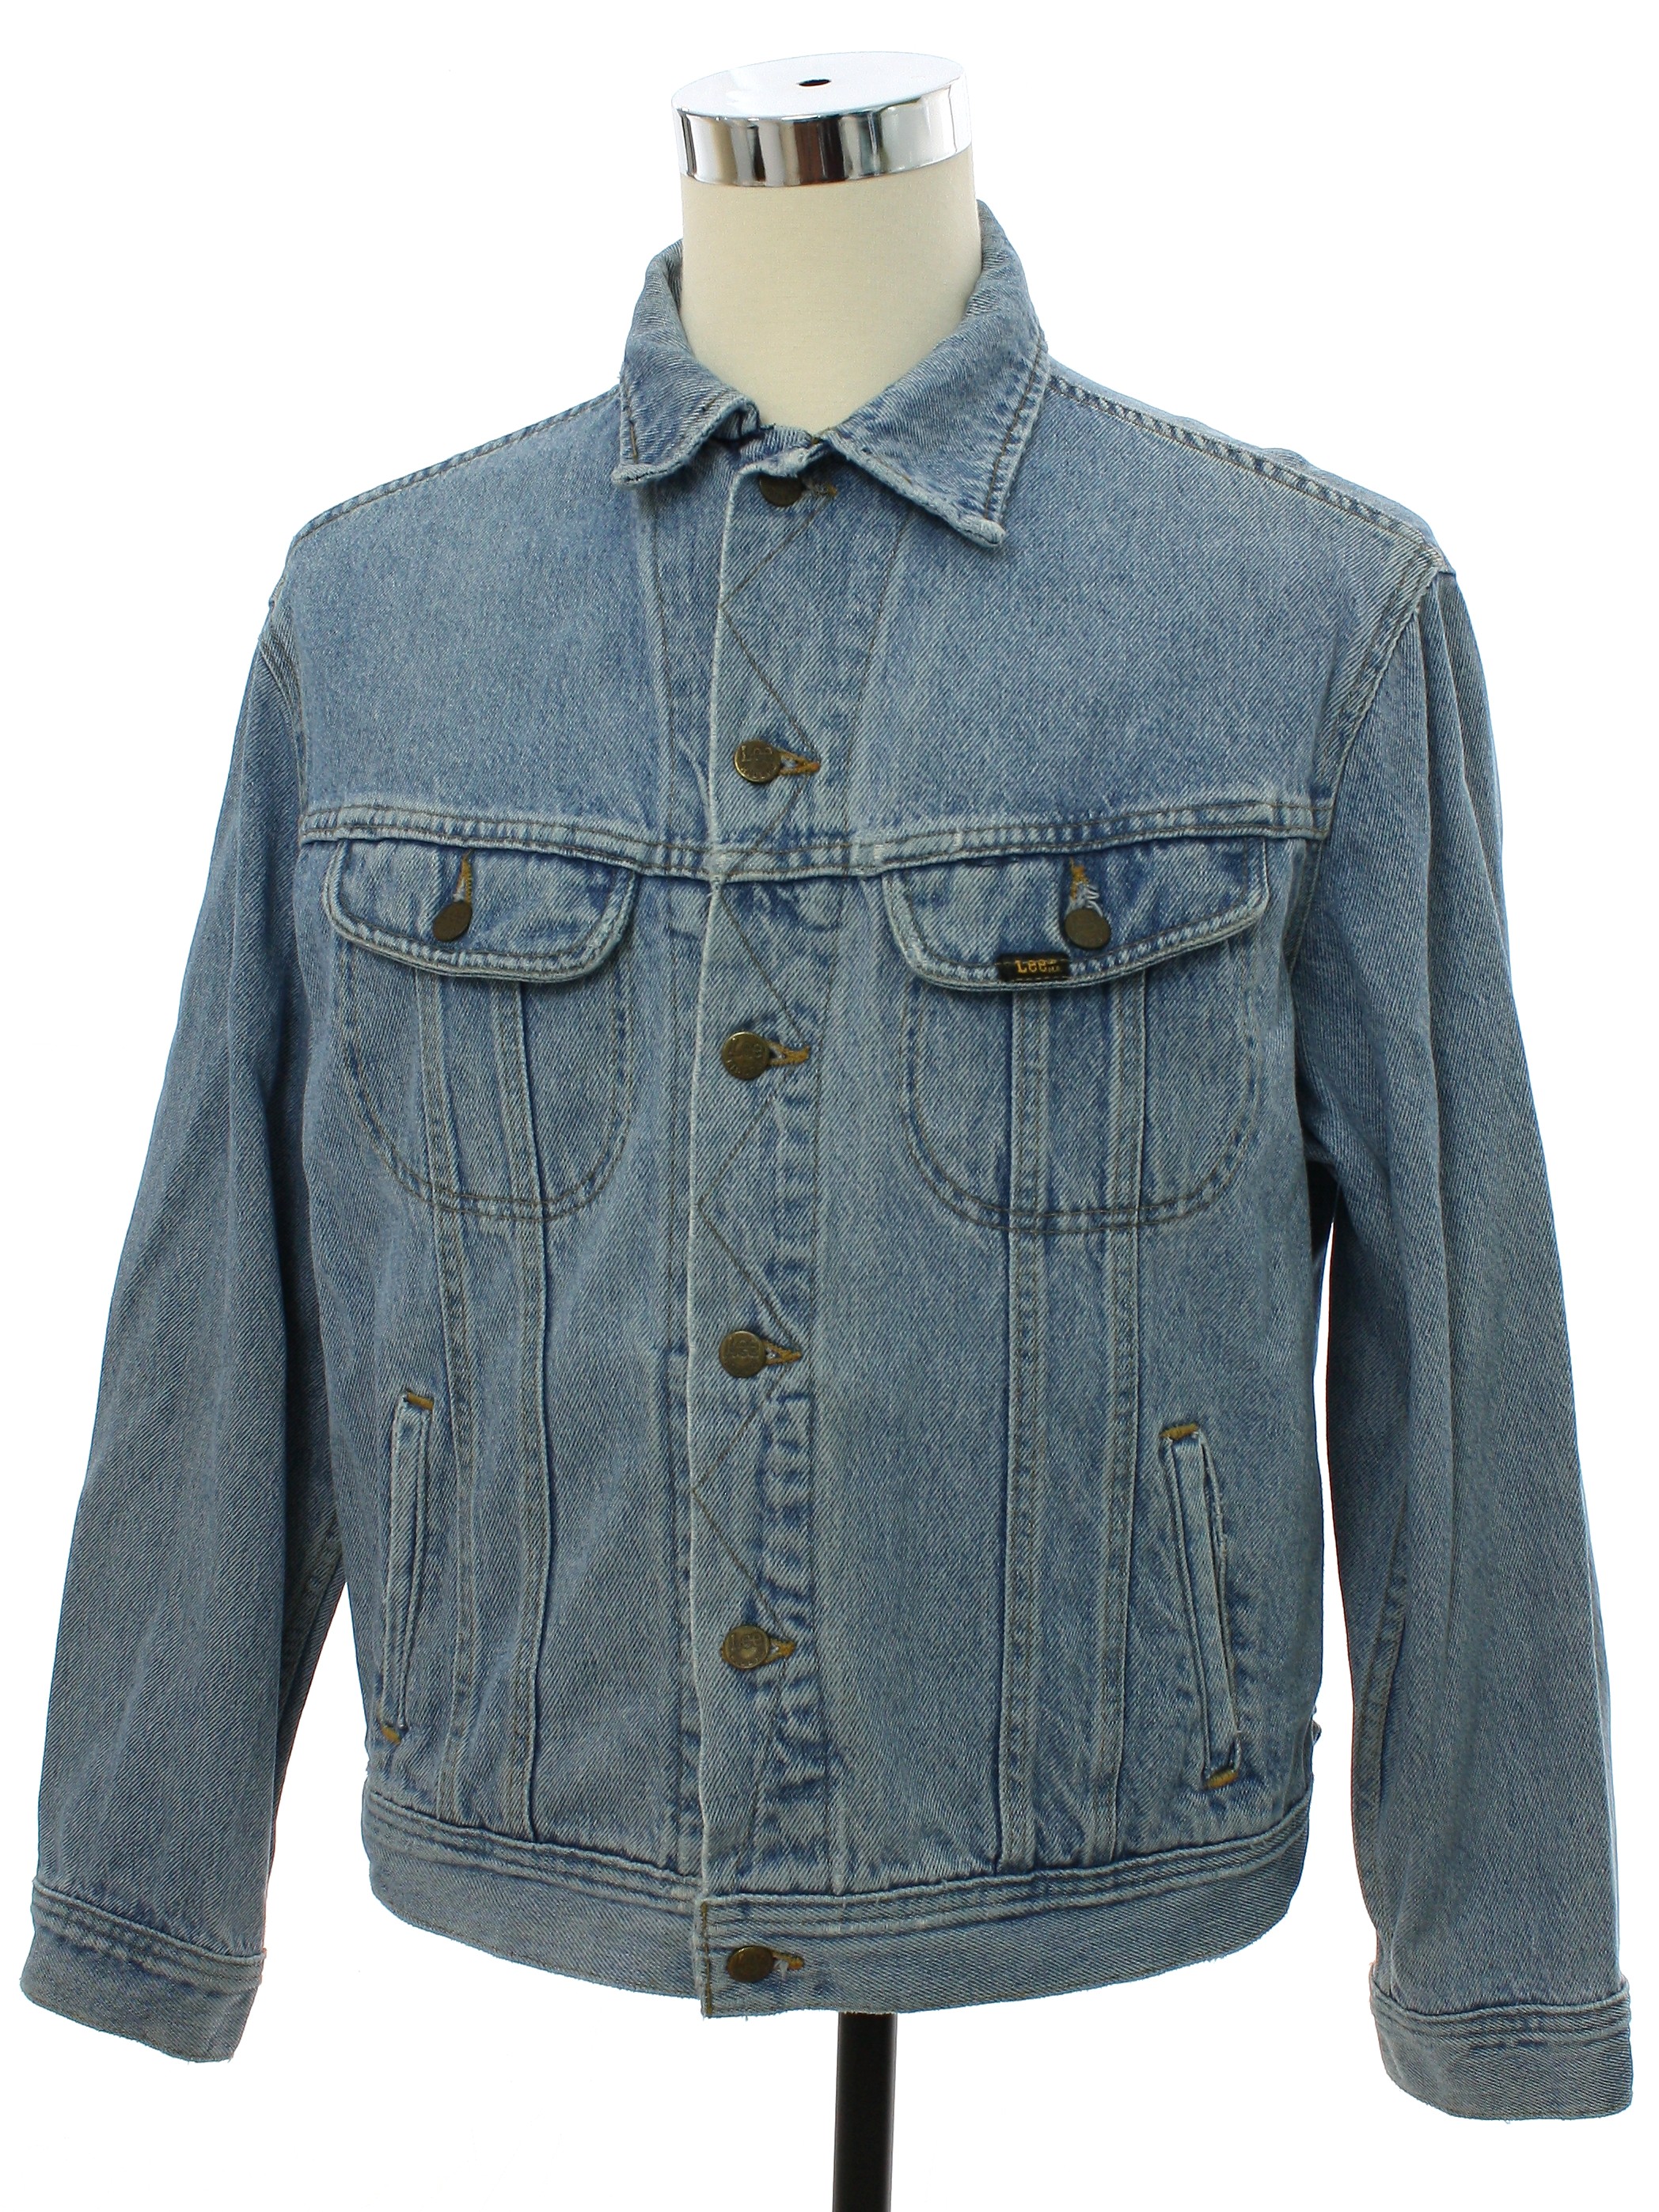 Retro 80s Jacket (Lee Riders) : 80s -Lee Riders- Mens faded blue cotton ...